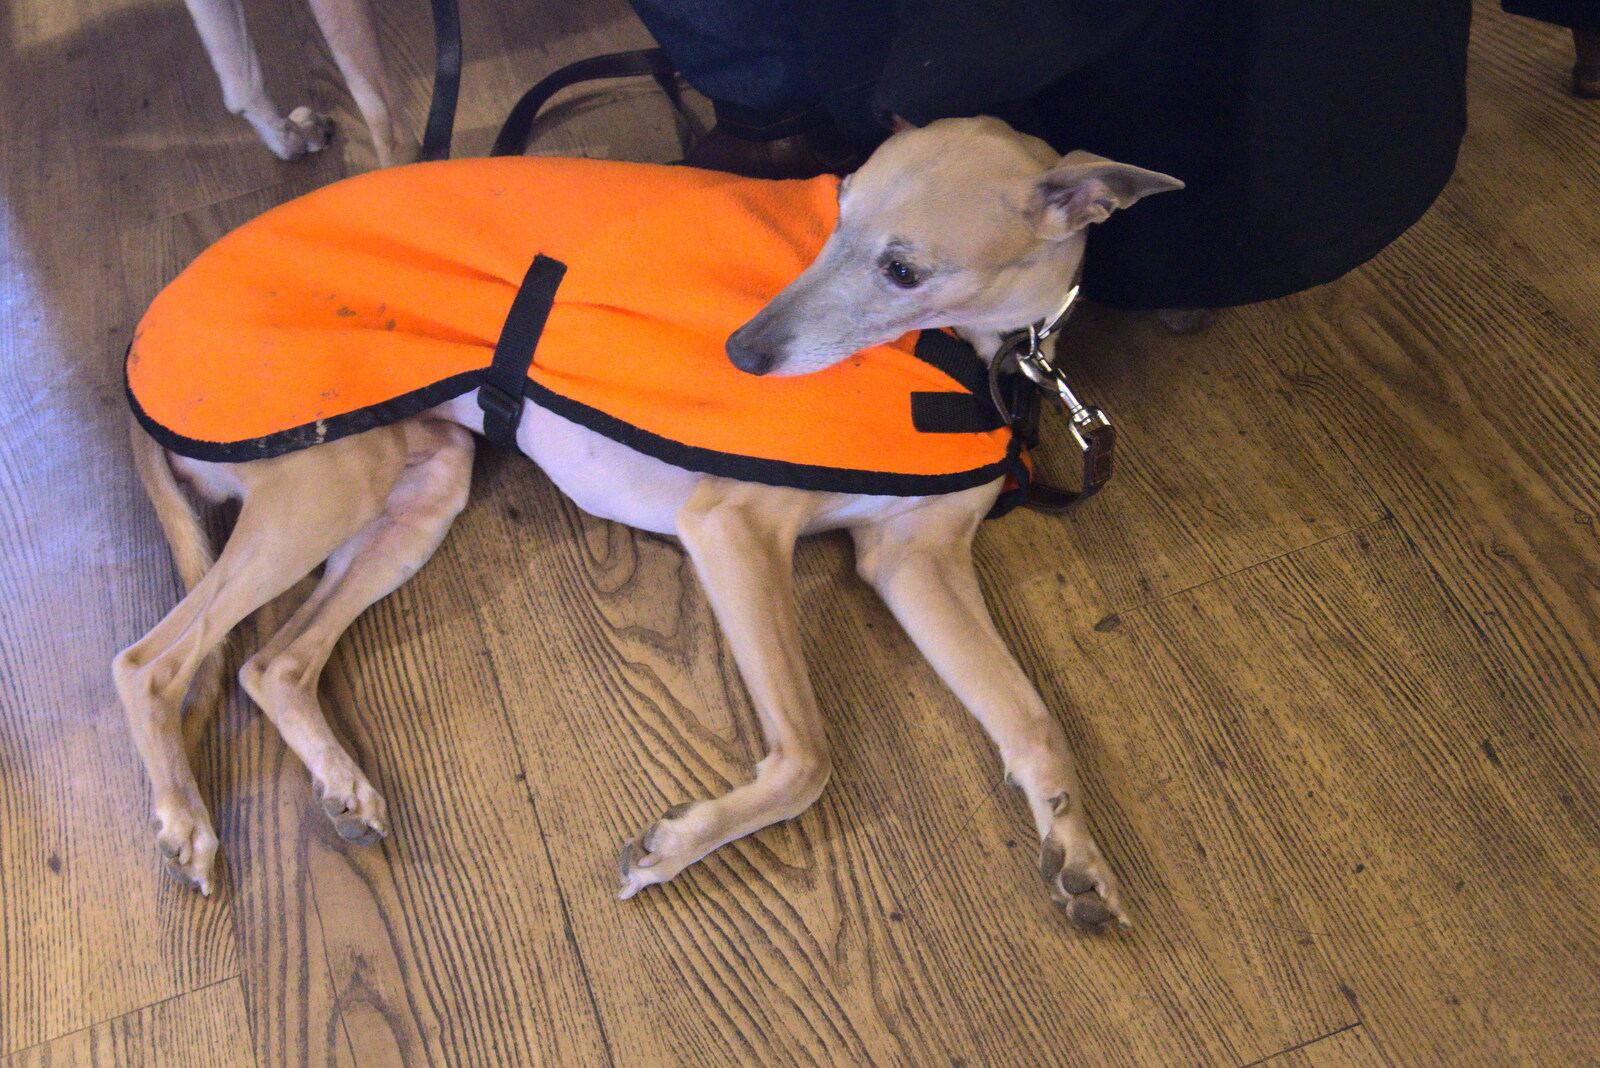 A Trip to Orford, Suffolk - 25th January 2020: A whippet in a coat